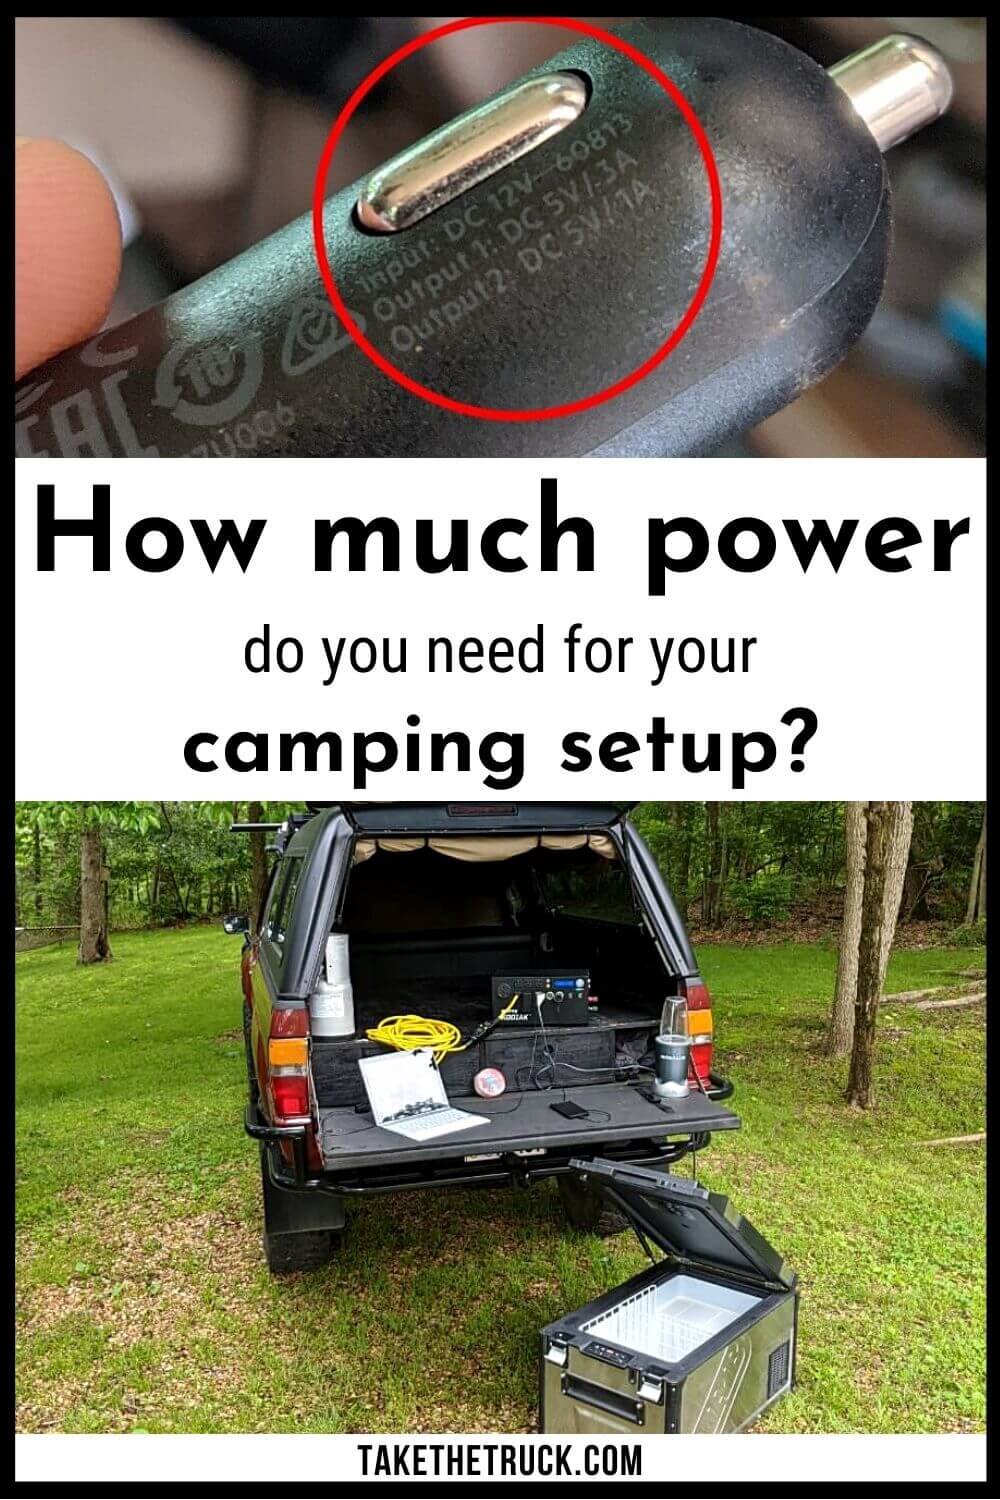 This post helps you calculate your power consumption when camping so you can select the right camping power supply for your needs, whether in a van, truck bed, suv, or other camper. 